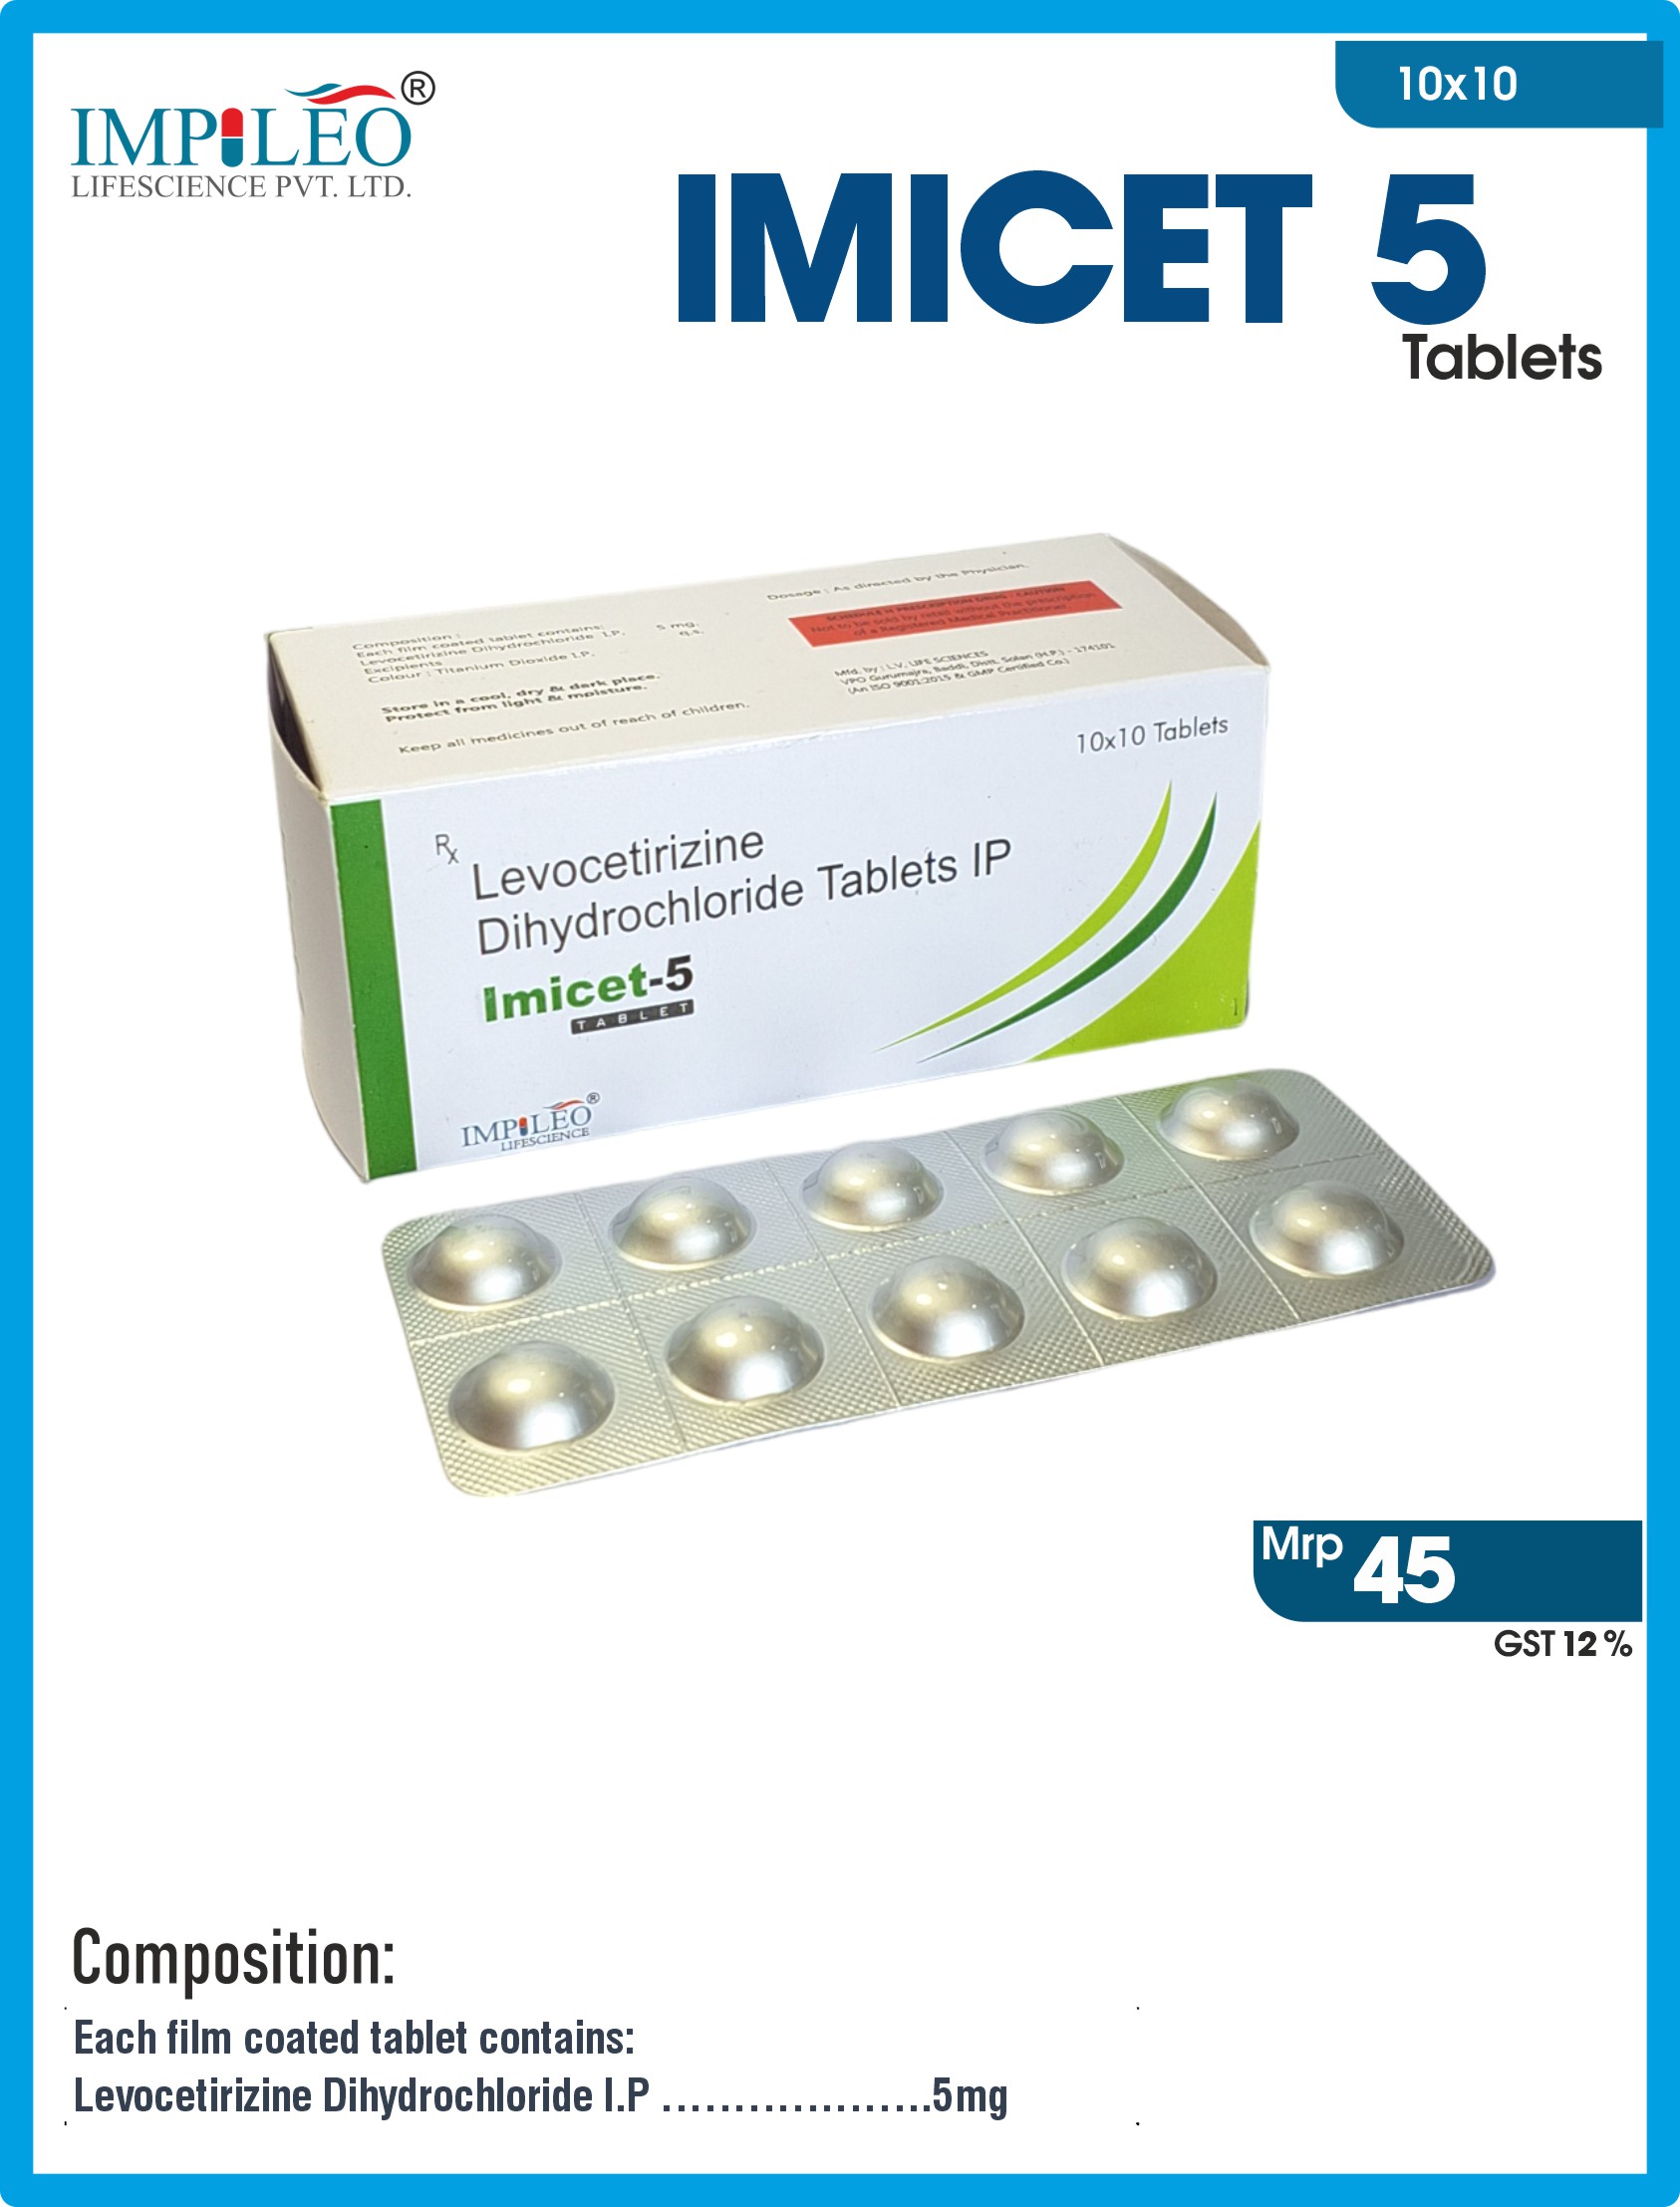 Maximize Your Wellbeing : Find Exceptional IMICET 5 Tablets from Reputable PCD Pharma Franchise in India